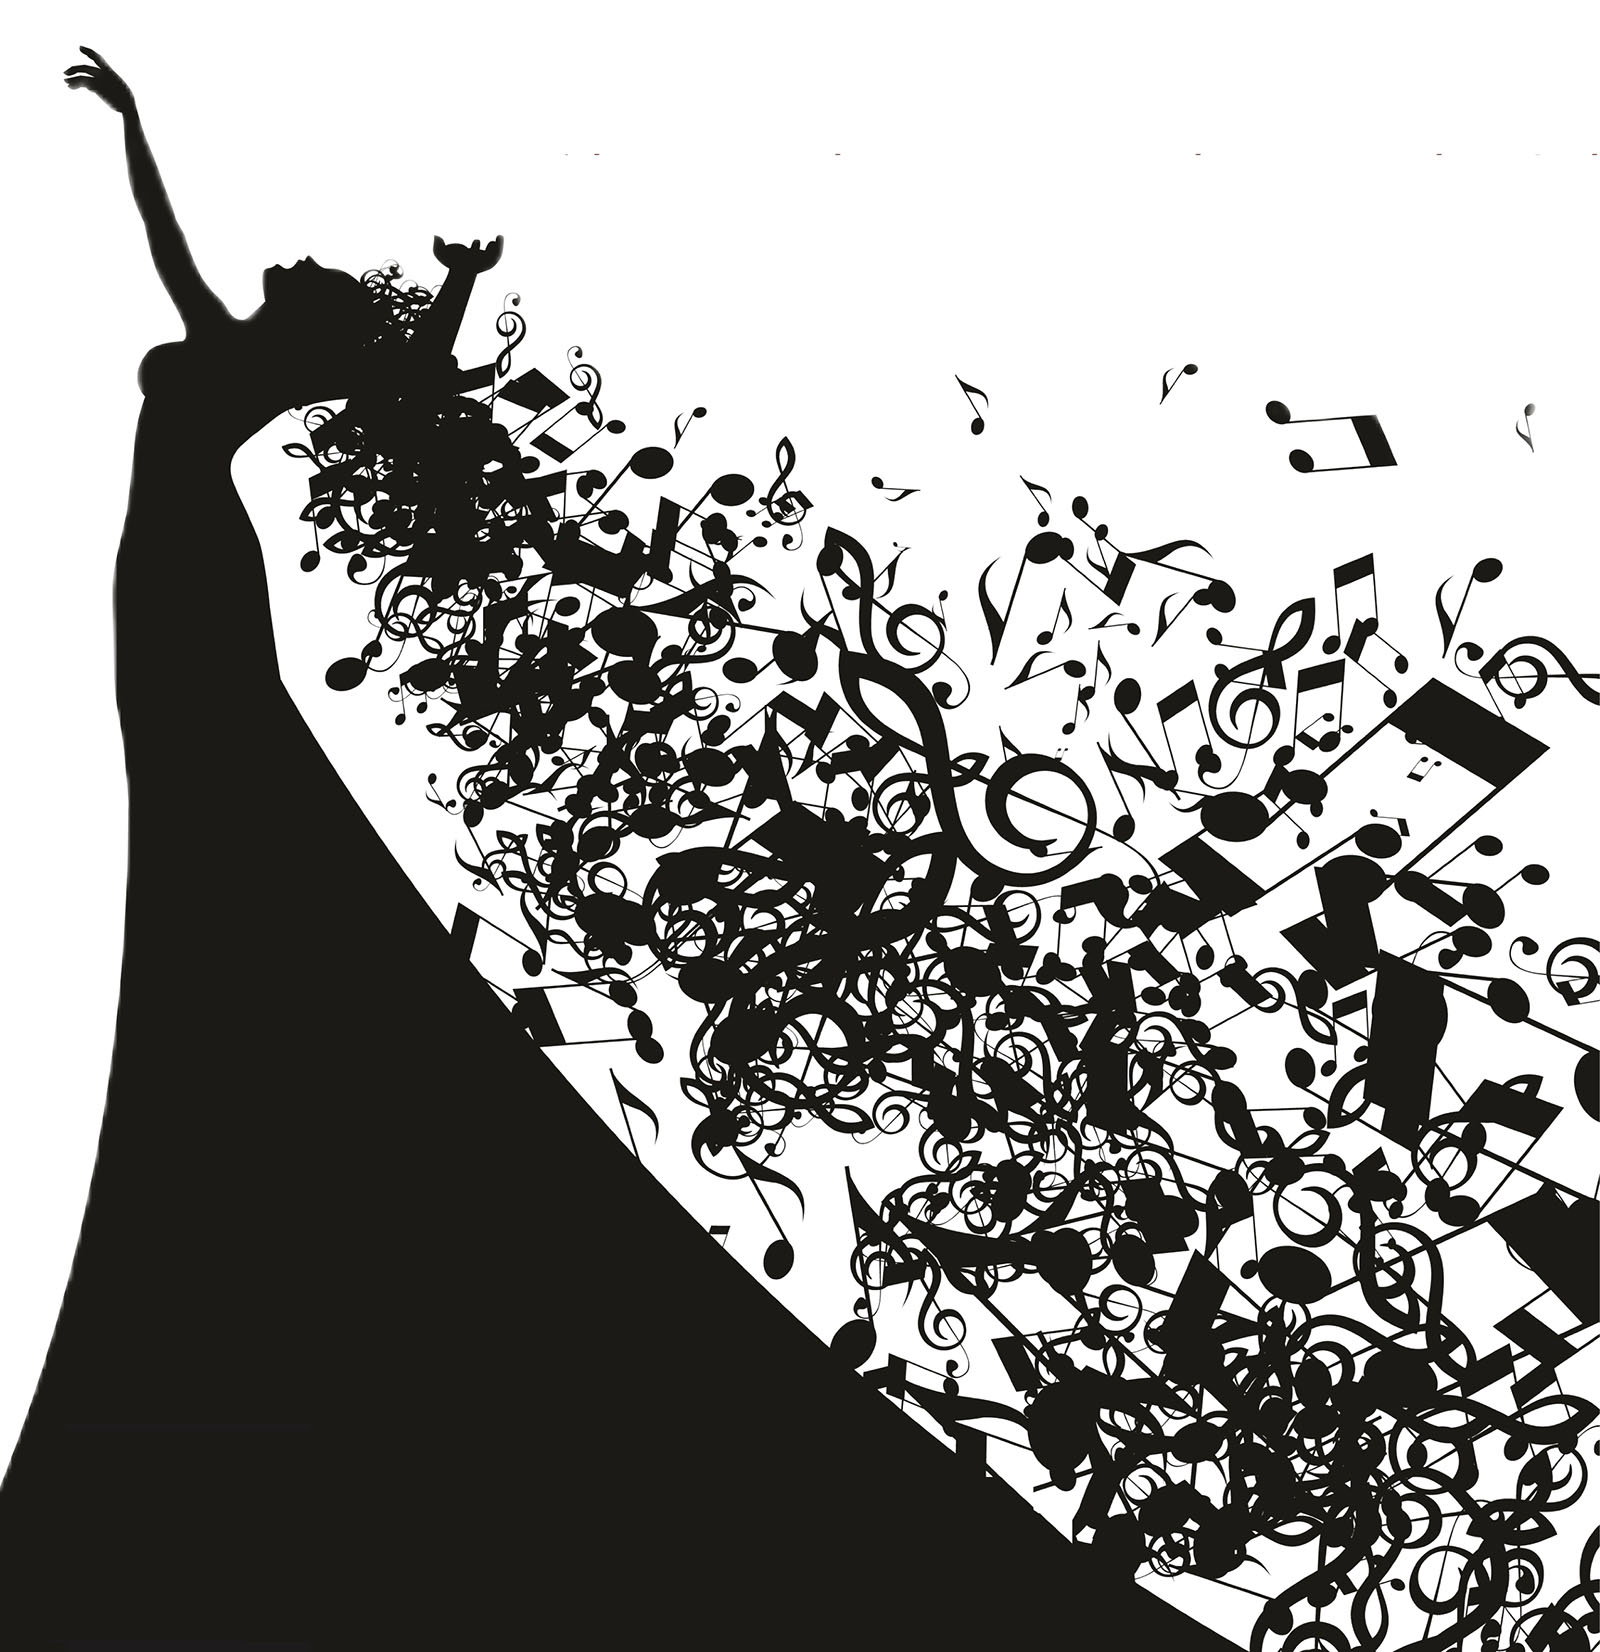 A slender silhouette of a person in a gown reaching up with a graceful wrist. The hair flows into a swarm of musical symbols flowing down the line of the gown.